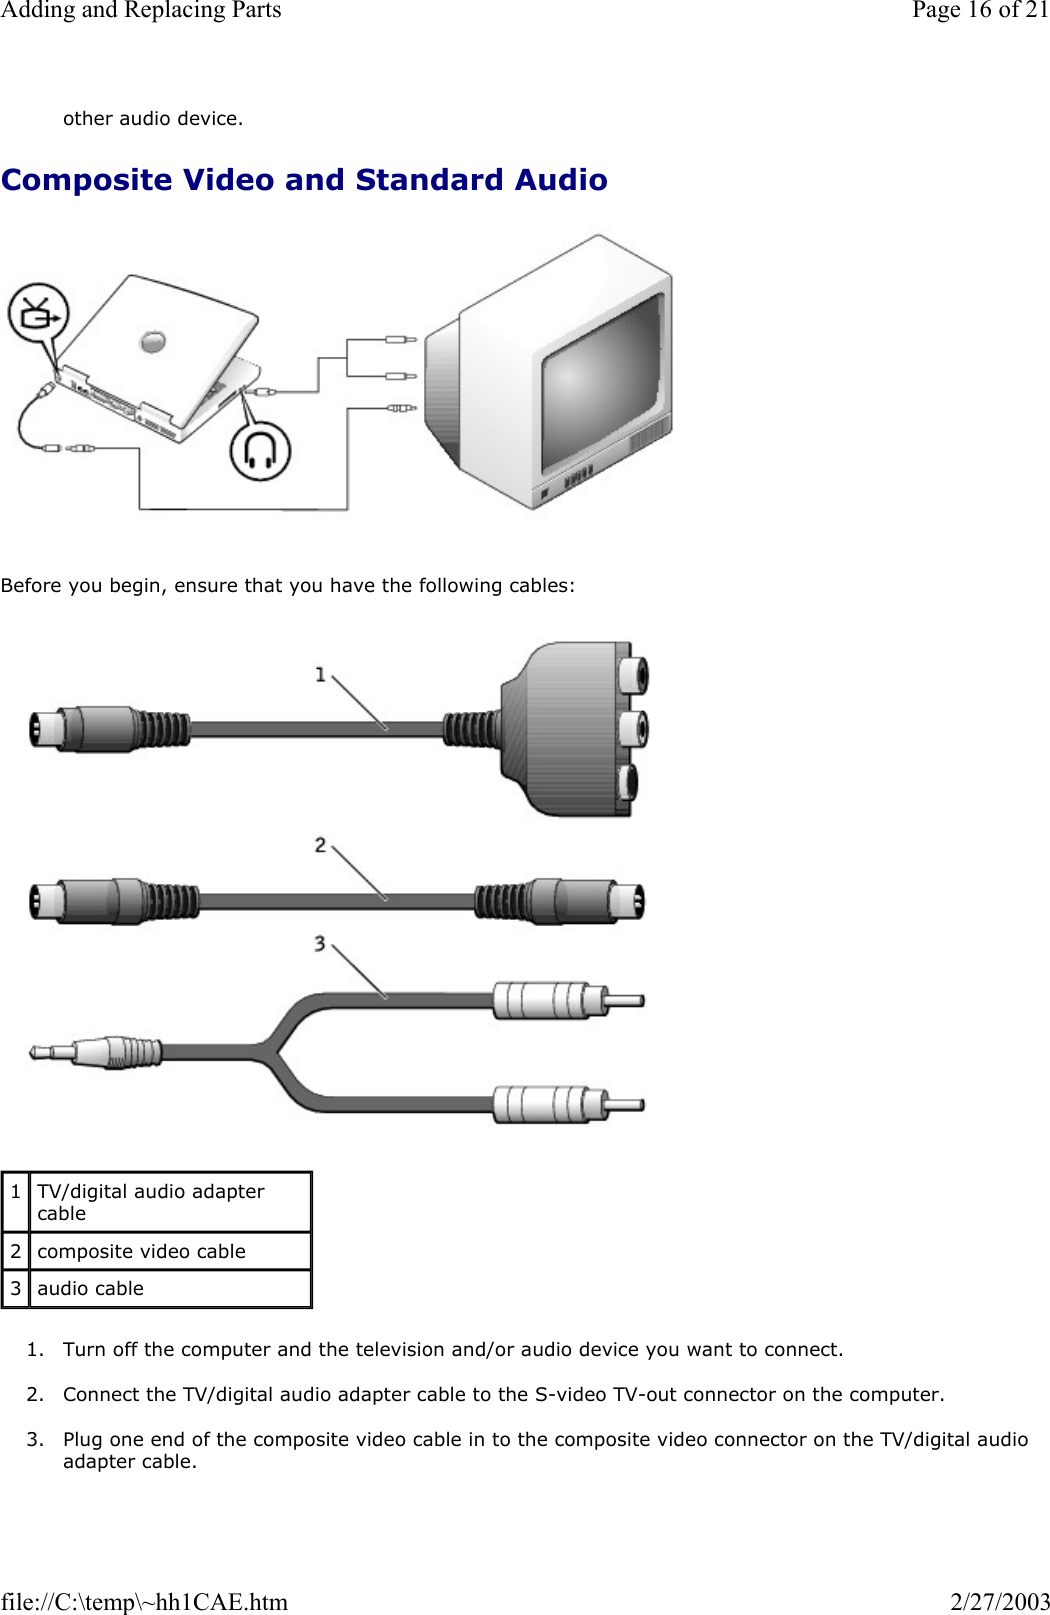 other audio device.  Composite Video and Standard Audio   Before you begin, ensure that you have the following cables:   1. Turn off the computer and the television and/or audio device you want to connect.  2. Connect the TV/digital audio adapter cable to the S-video TV-out connector on the computer.  3. Plug one end of the composite video cable in to the composite video connector on the TV/digital audio adapter cable.  1  TV/digital audio adapter cable 2  composite video cable 3  audio cable Page 16 of 21Adding and Replacing Parts2/27/2003file://C:\temp\~hh1CAE.htm